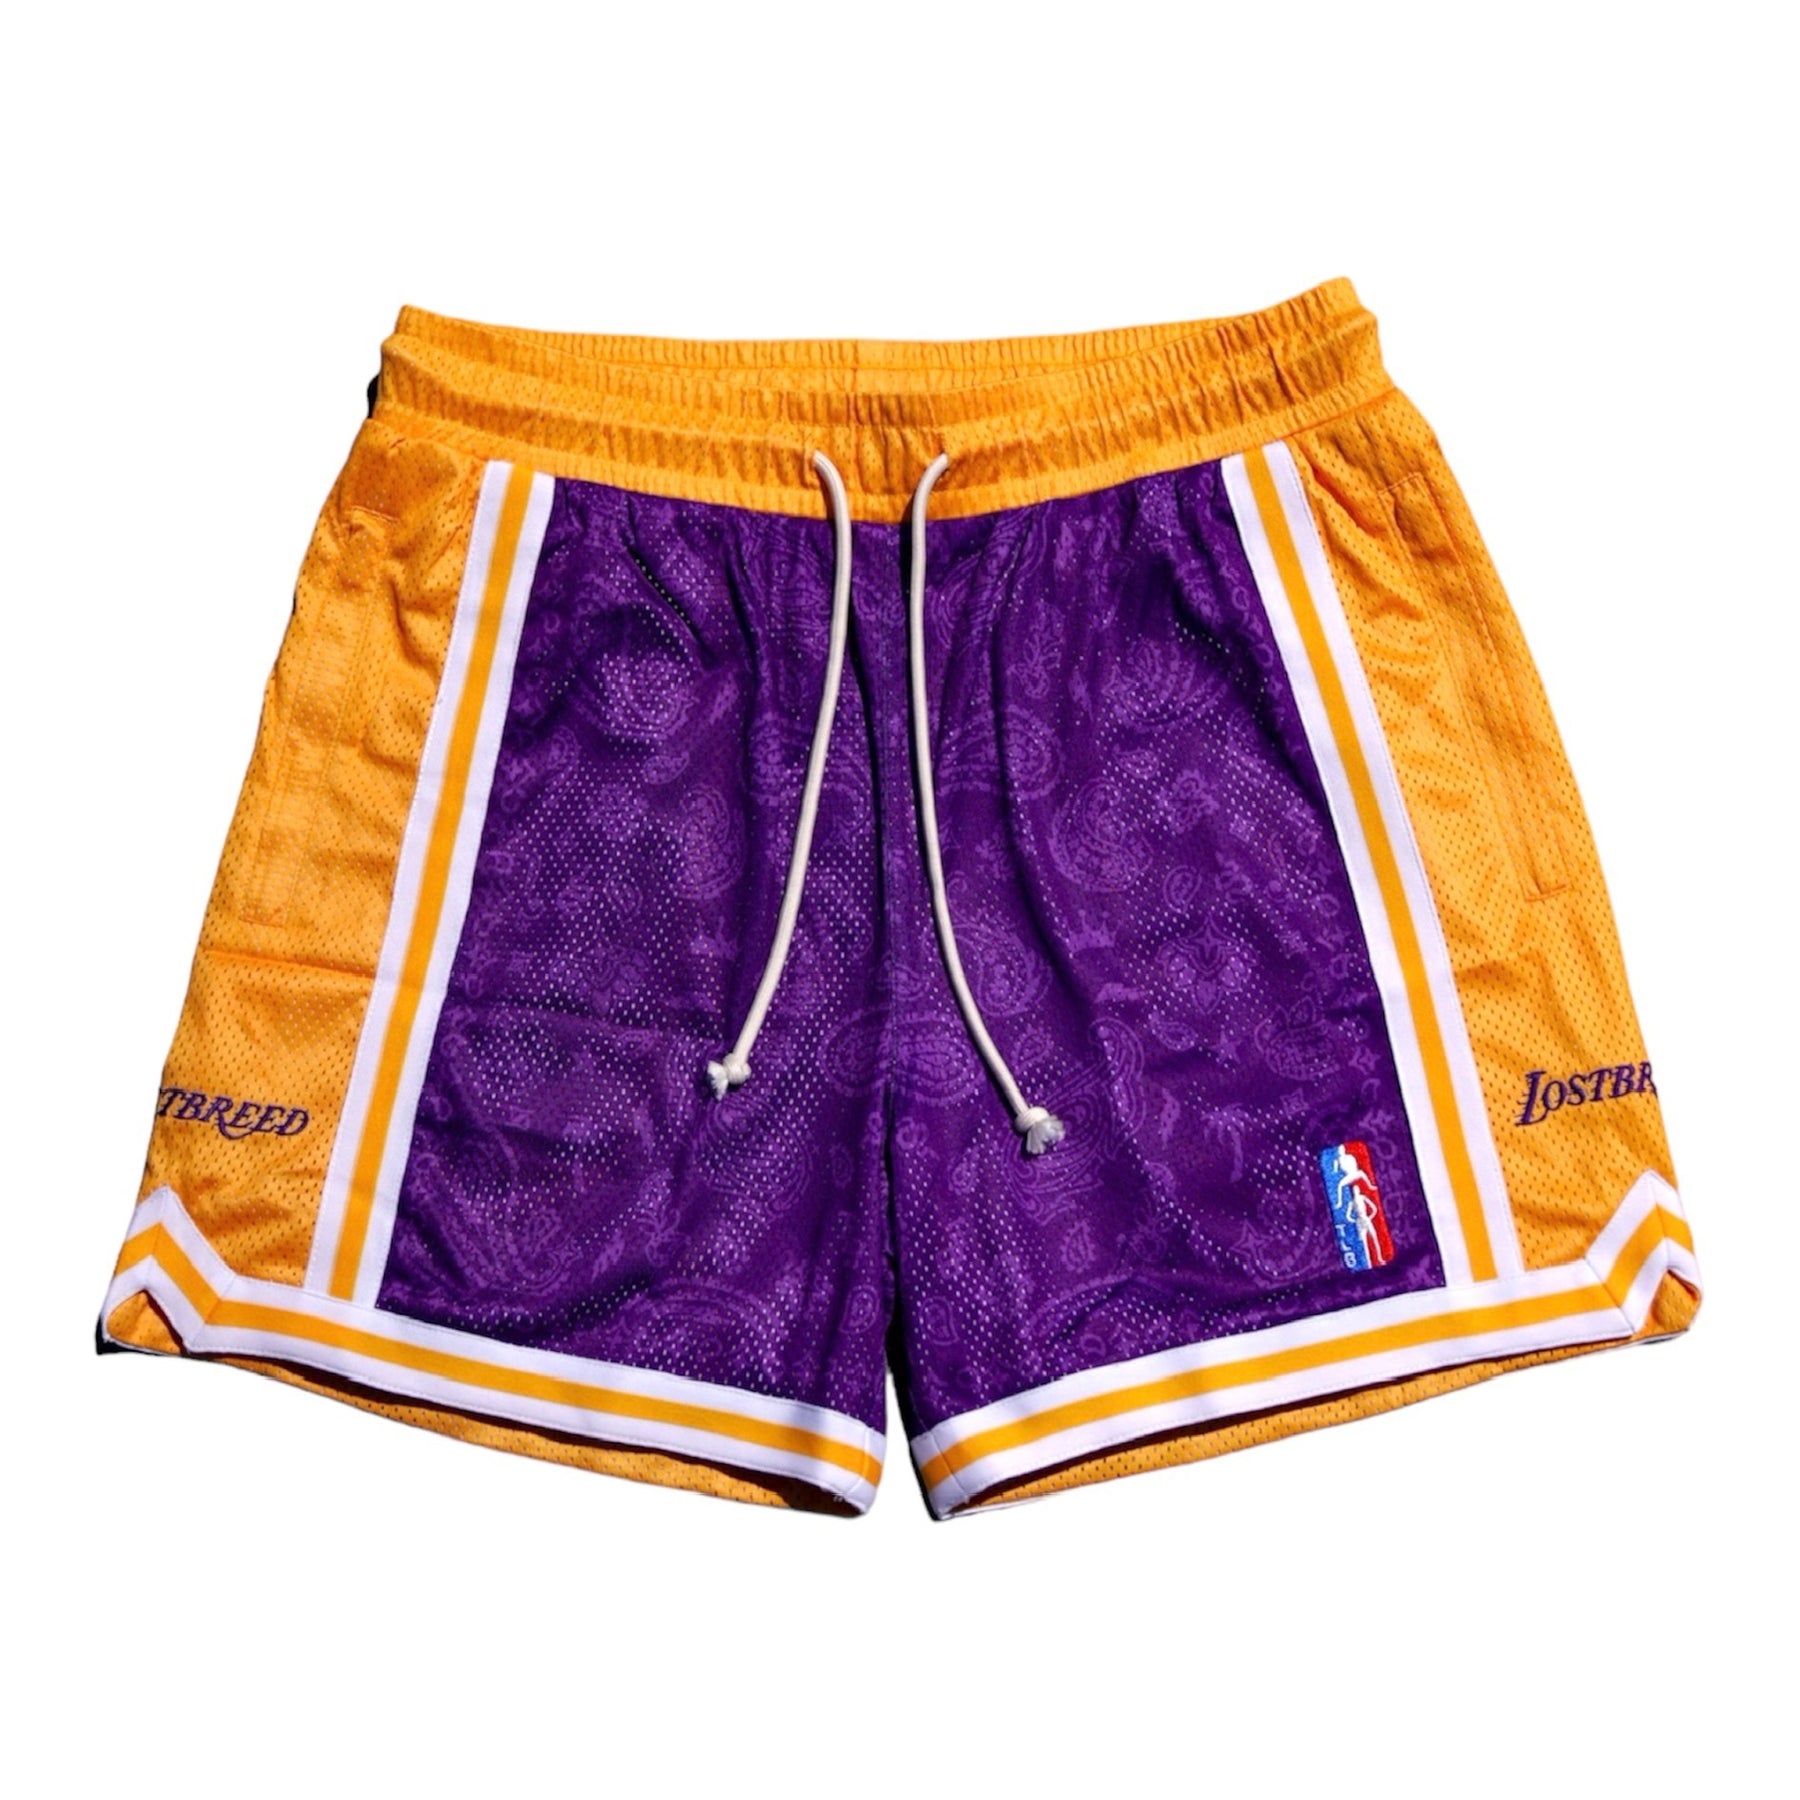 Laker Shorts – The Lost Breed